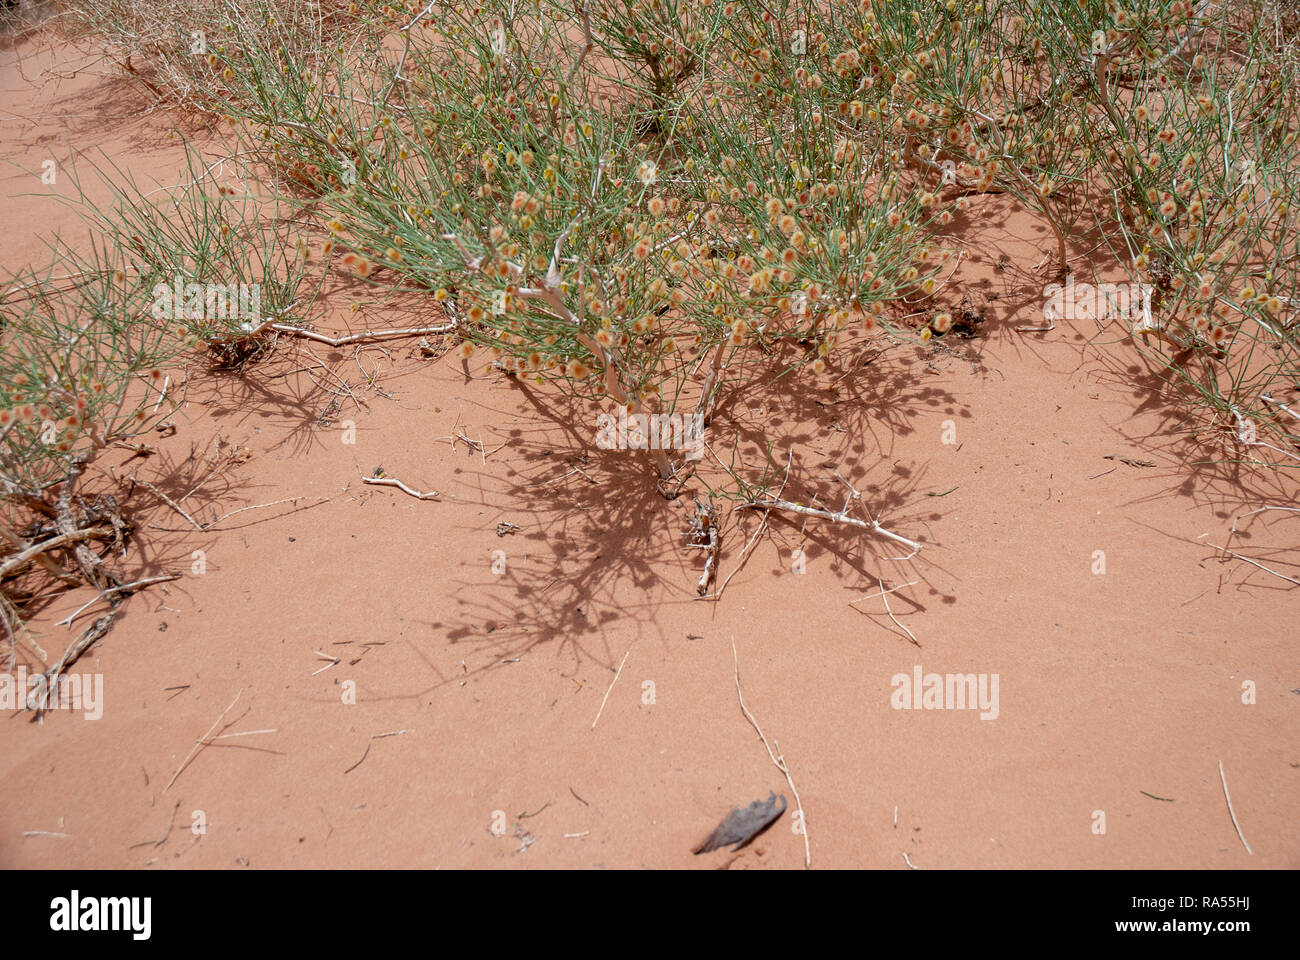 Growth out of hardship - green leafs grow out of the red desert sand Photographed in wadi rum, Jordan Stock Photo